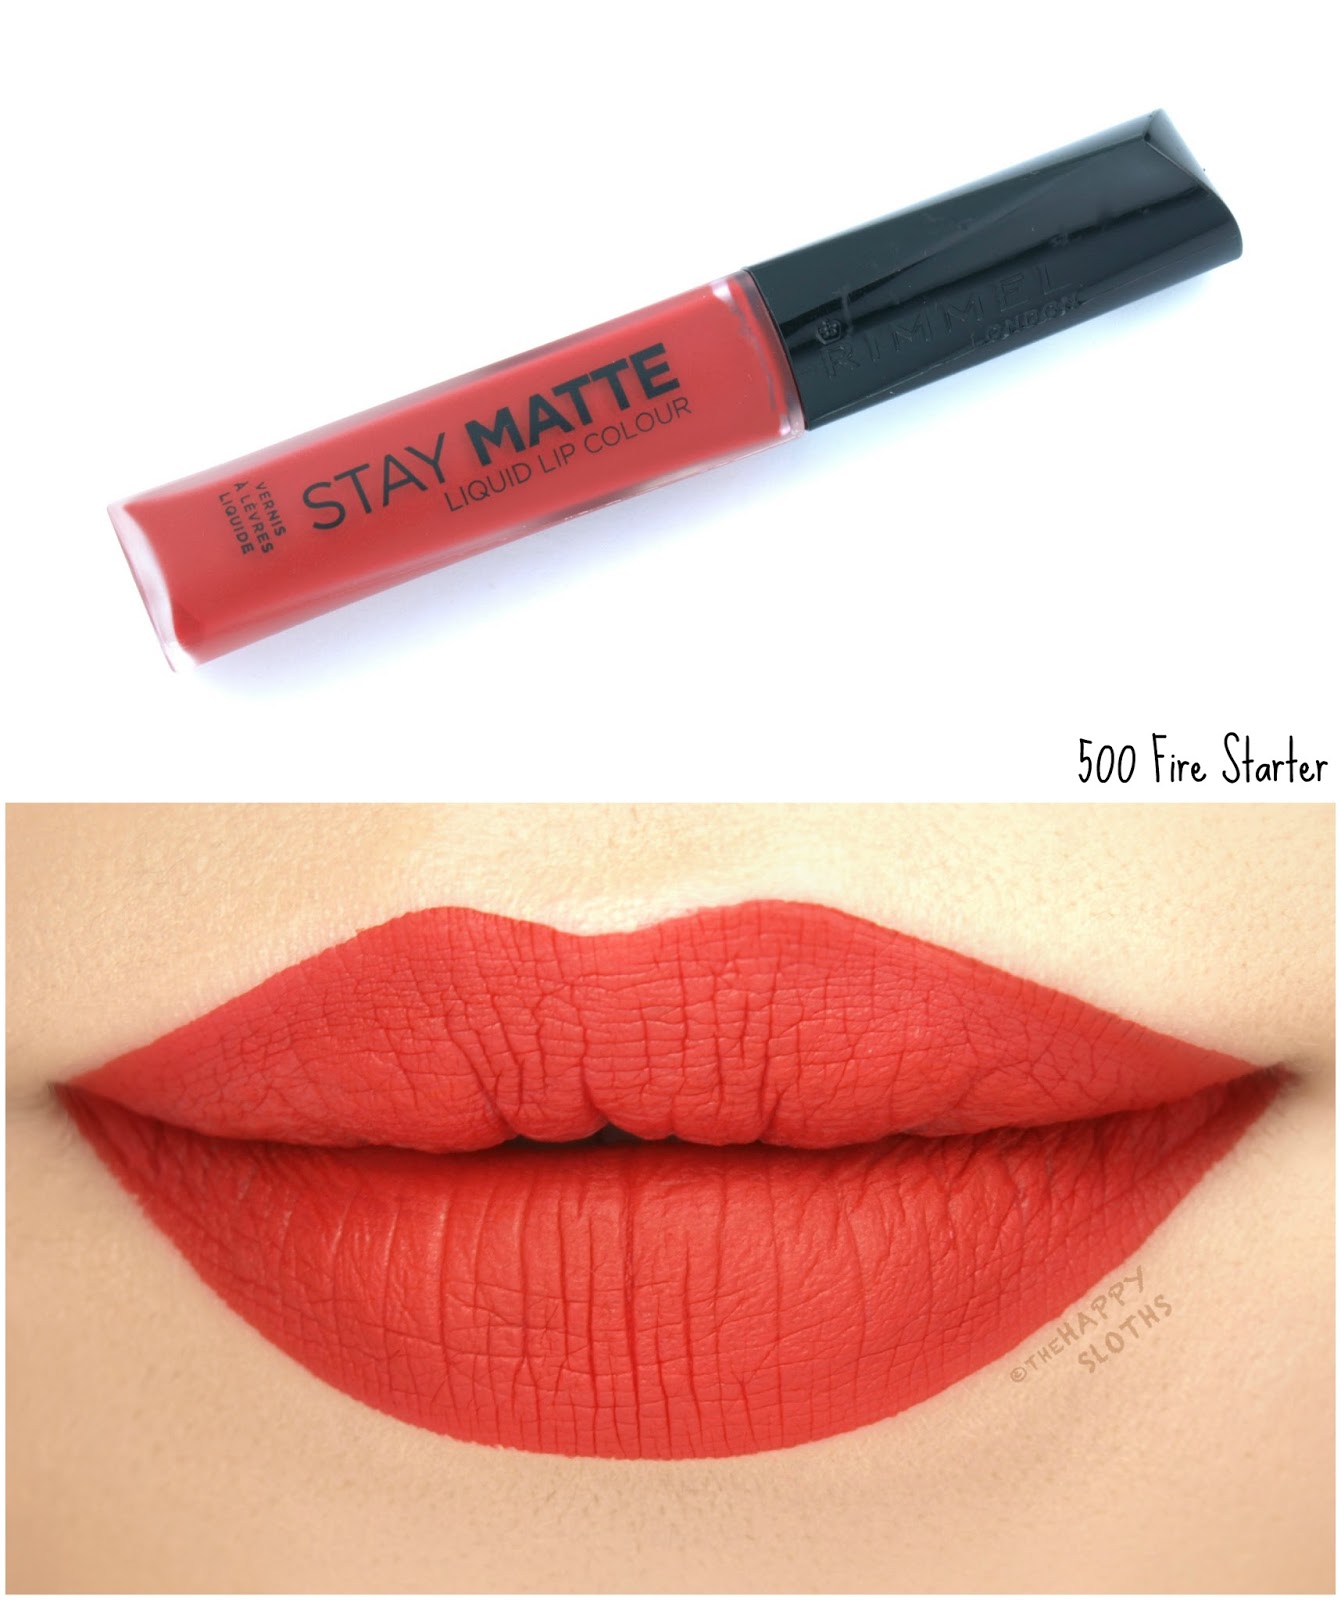 Rimmel London Stay Matte Liquid Lip Colour | 500 Fire Starter: Review and Swatches